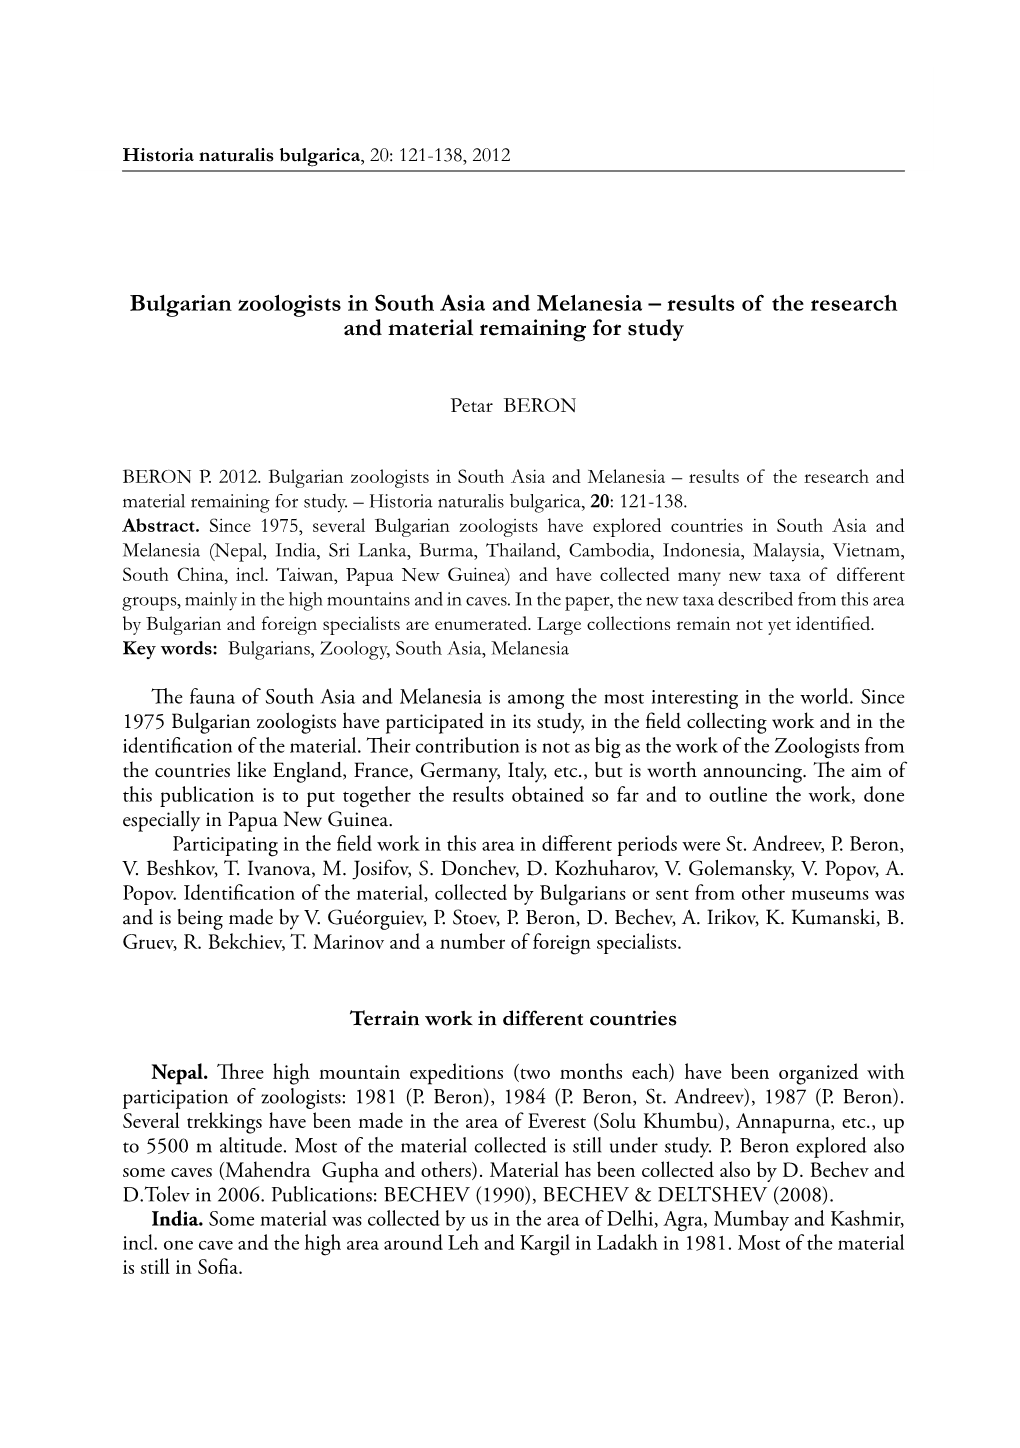 Bulgarian Zoologists in South Asia and Melanesia — Results of The